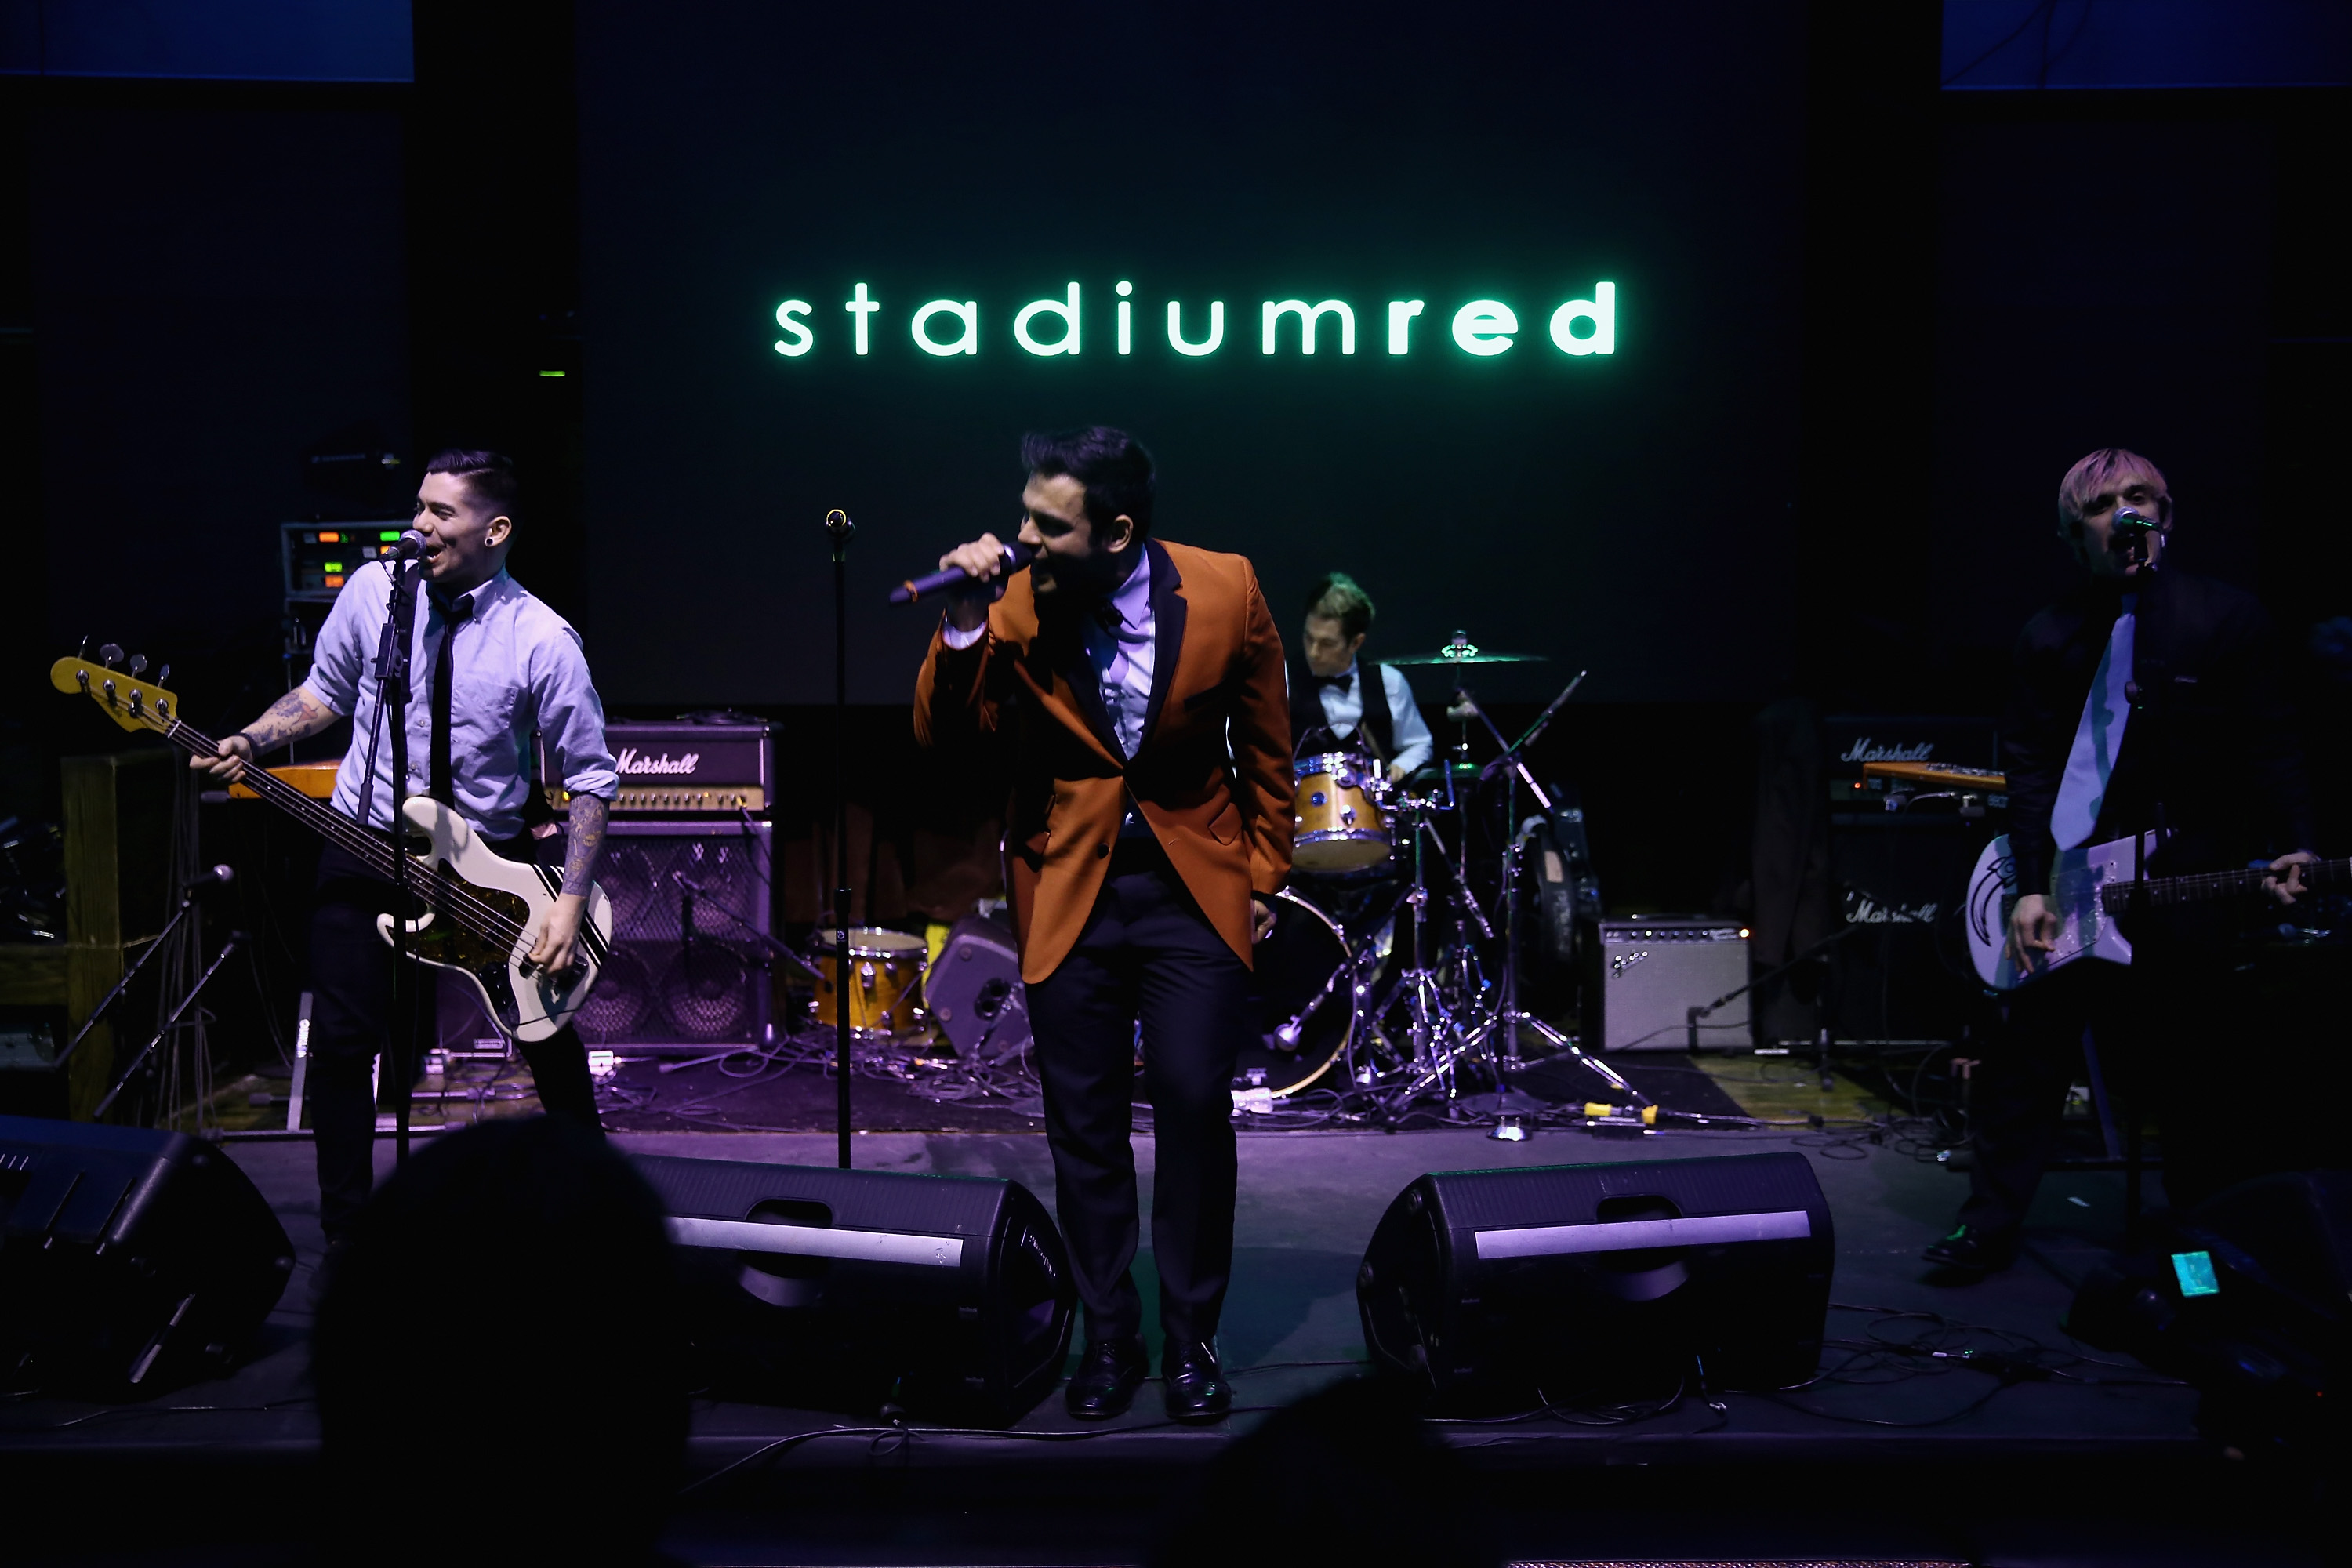  Joe Ragosta, Anthony Mingoia, Marc Kantor, Rob Felicetti, and Corey DeVincenzo of Patent Pending perform on stage at the GREY GOOSE and Stadiumred New York VIP Grammy Awards Party